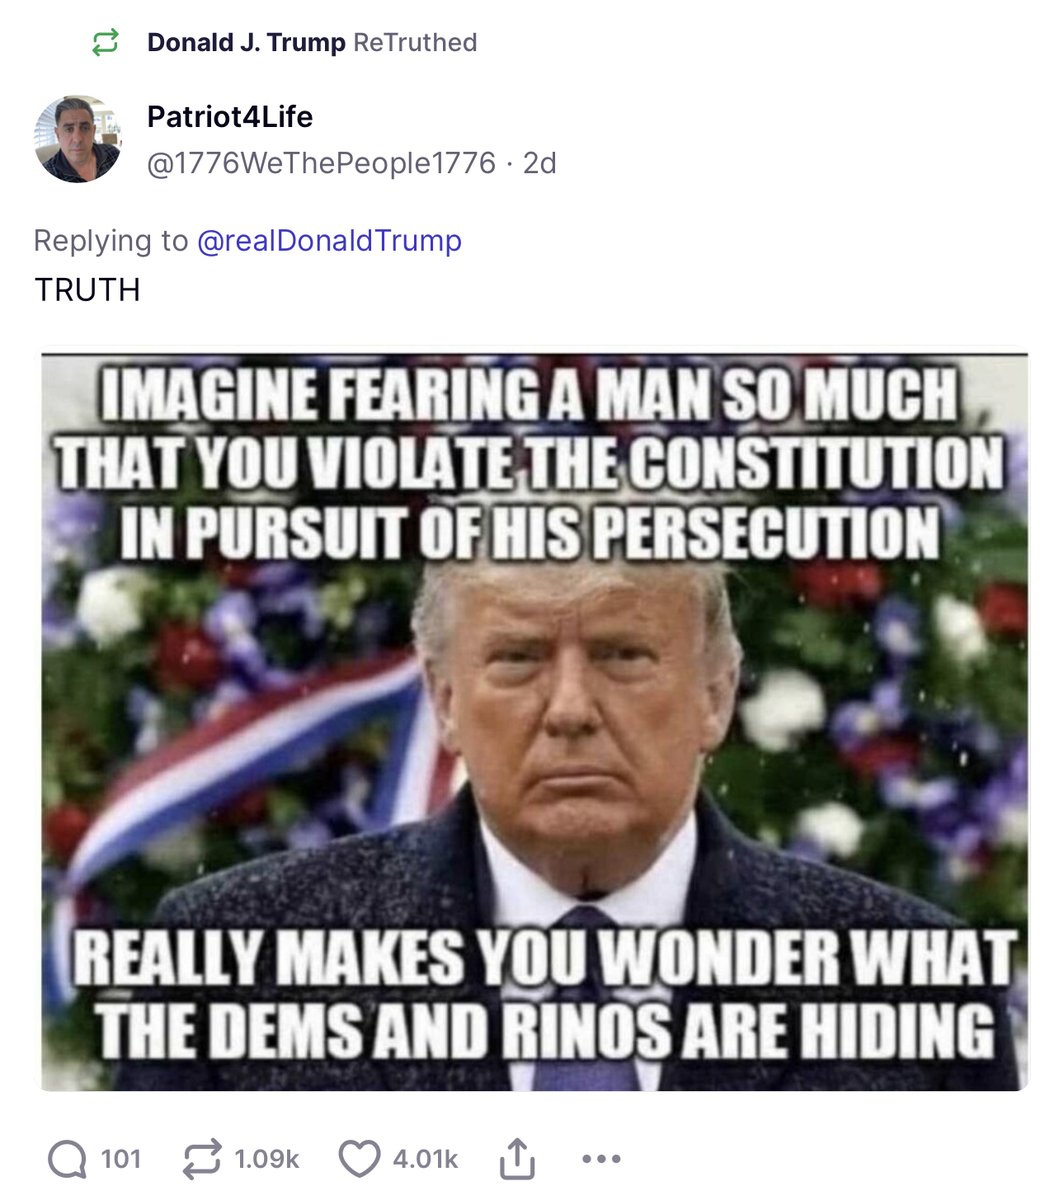 Trump repost says “Dems and RINOs are hiding” things and fear Trump